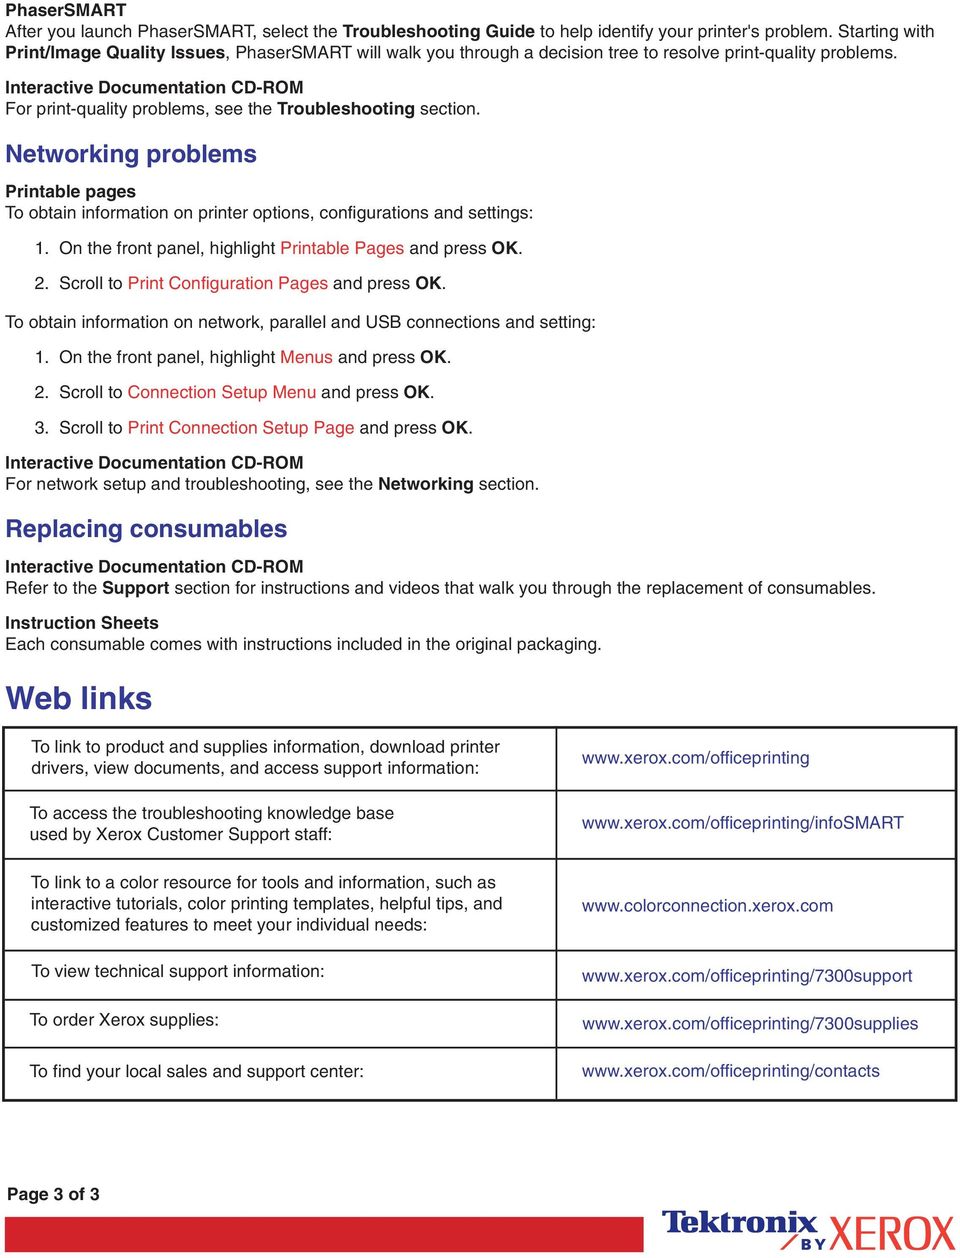 Interactive Documentation CD-ROM For print-quality problems, see the Troubleshooting section.